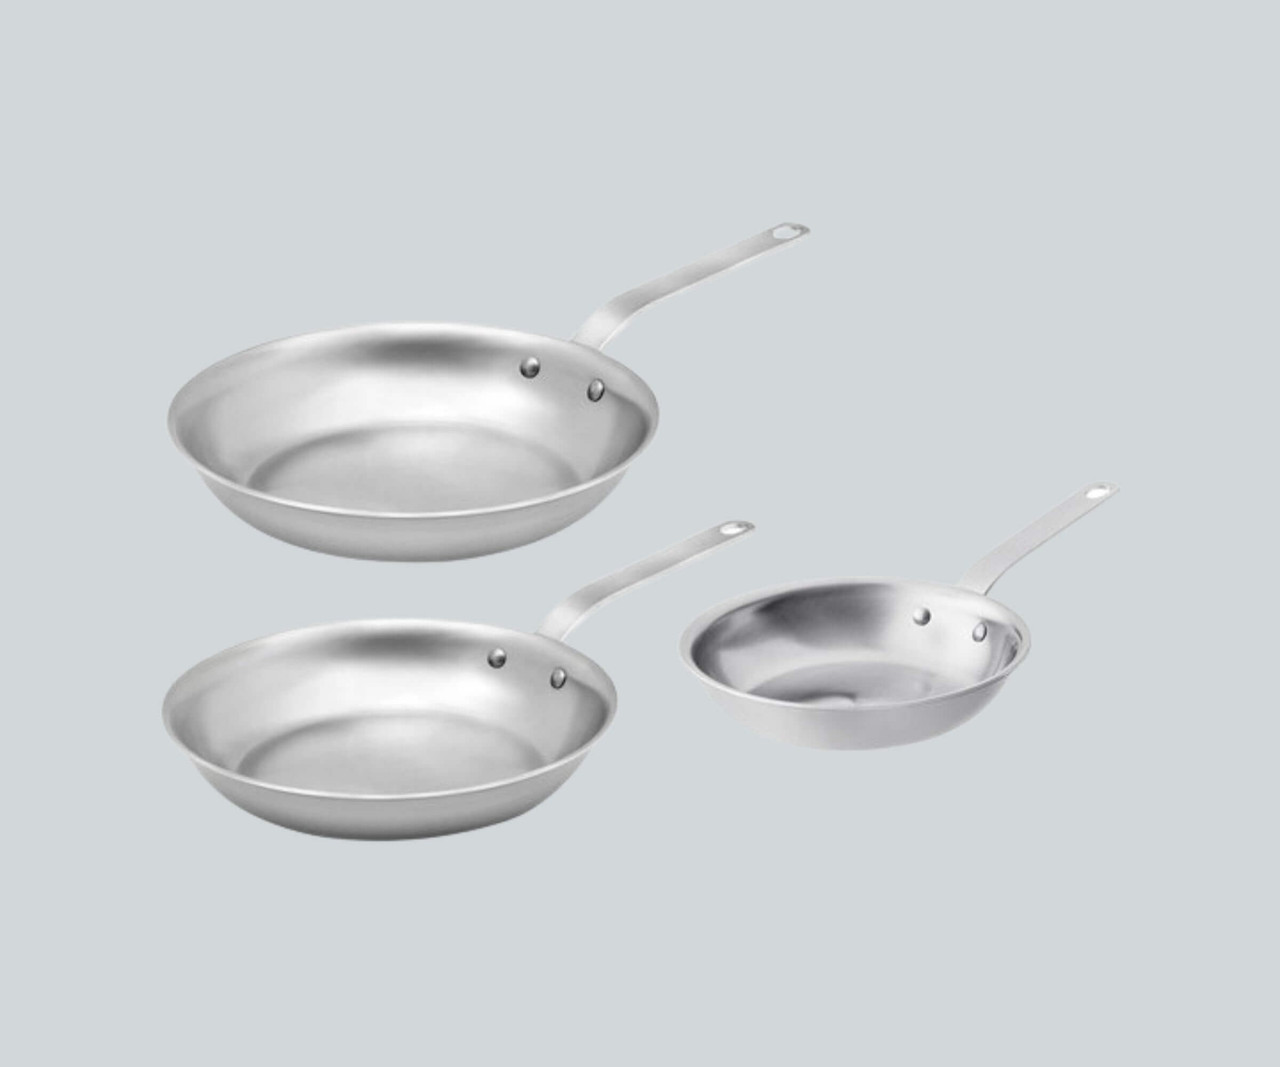 Vollrath Tribute 3-Piece 8", 10", and 12" Stainless Steel Fry Pan Set-Chicken Pieces